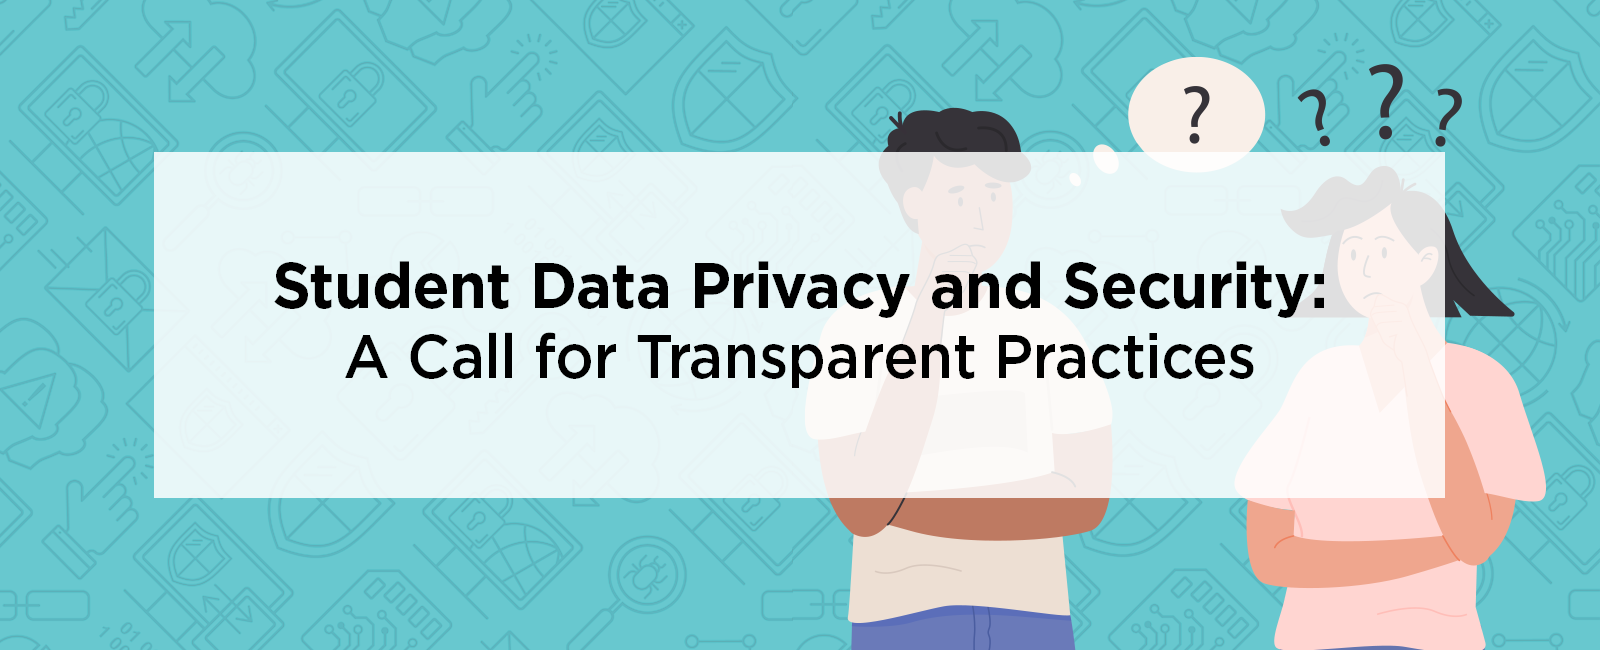 Student Data Privacy and Security: A Call for Transparent Practices